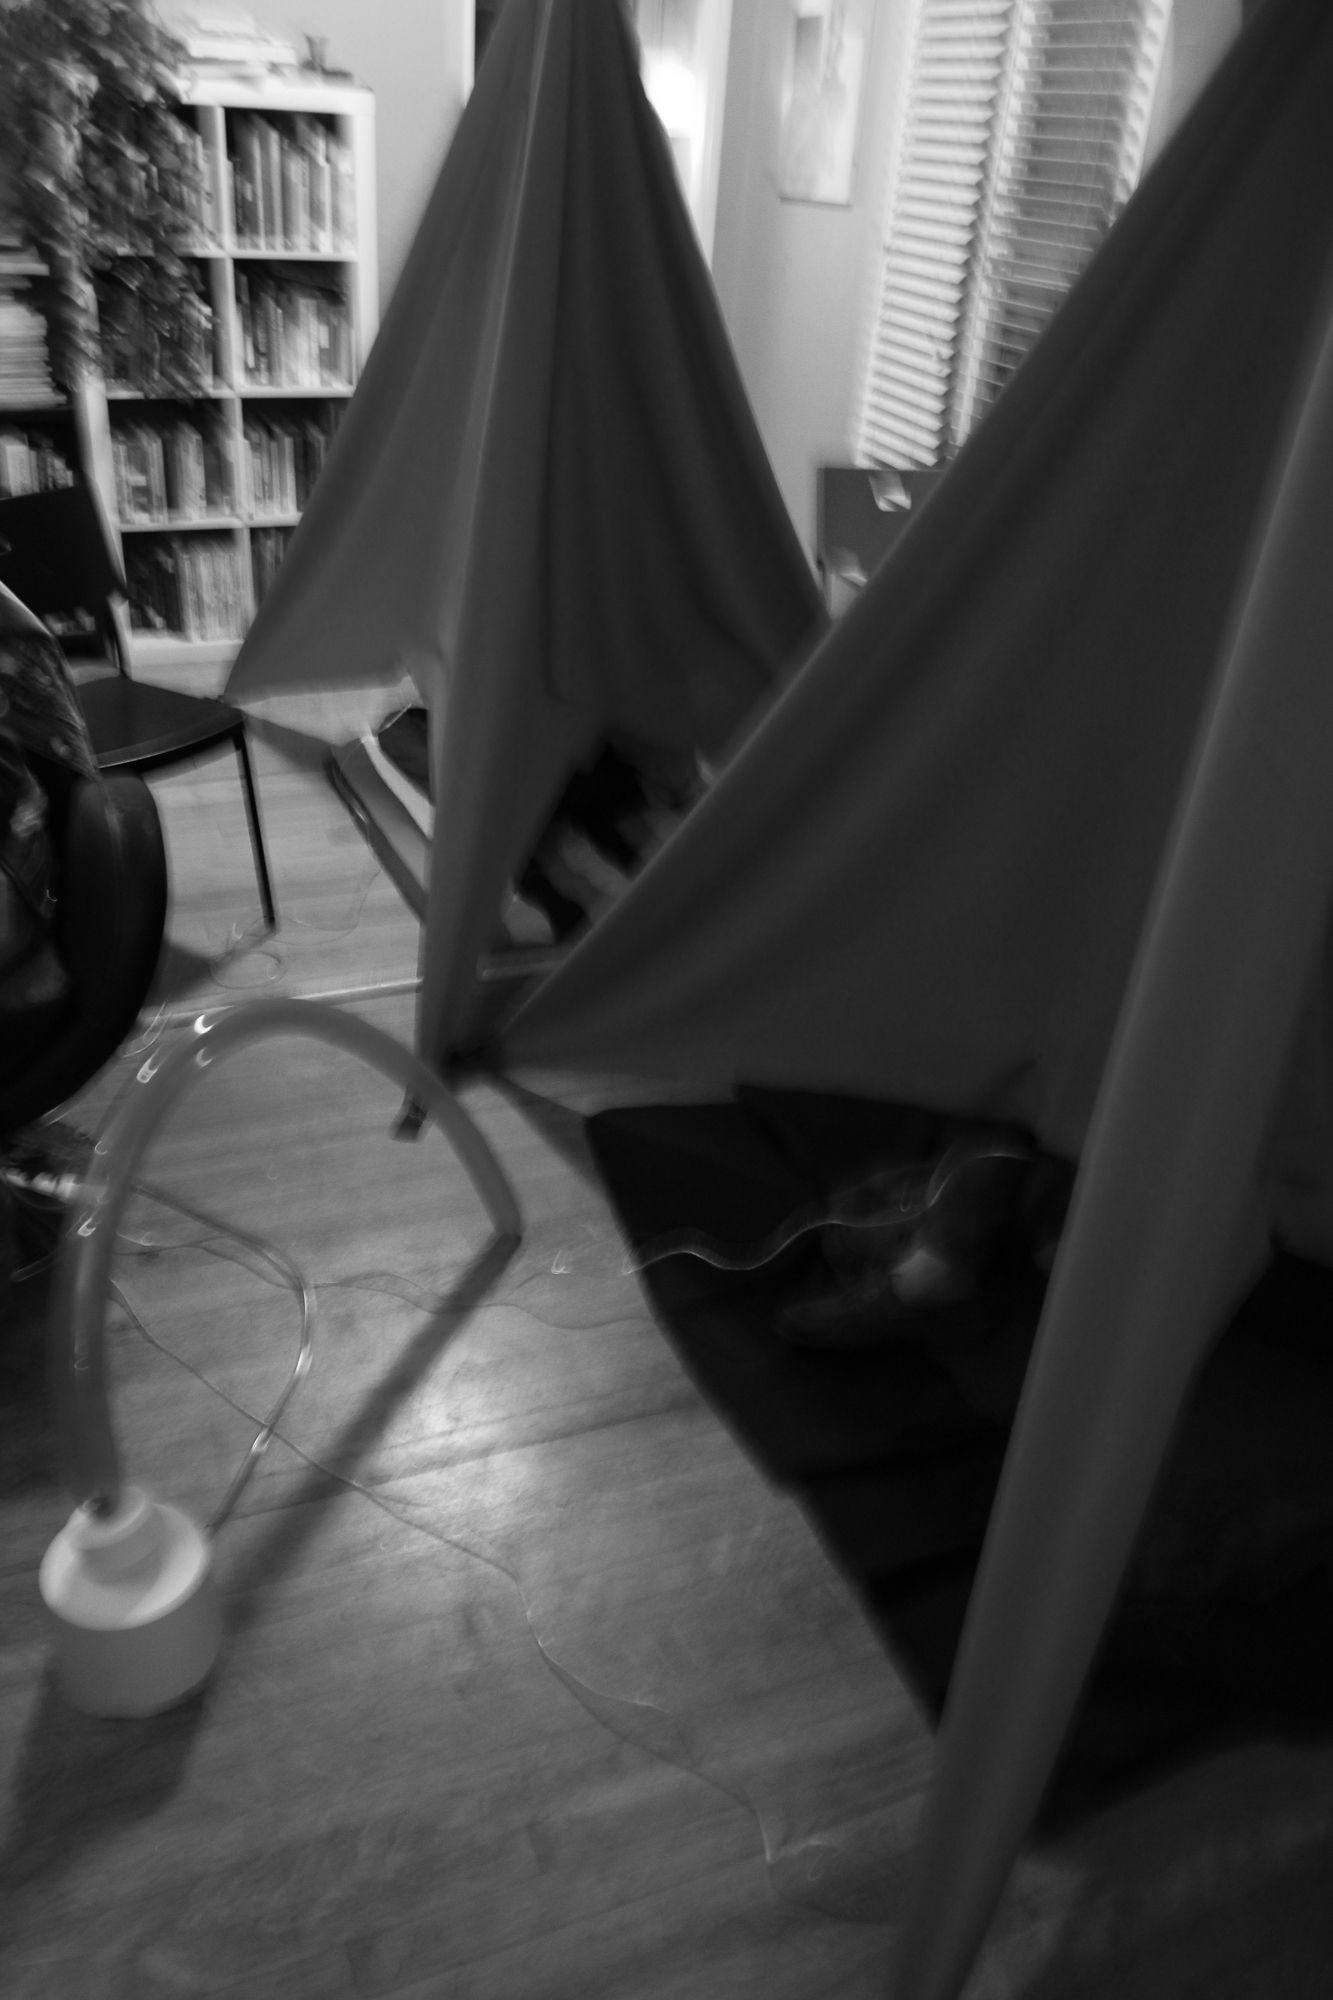 There are two tents inside a small room with a long balloon attached to a white base on the side.